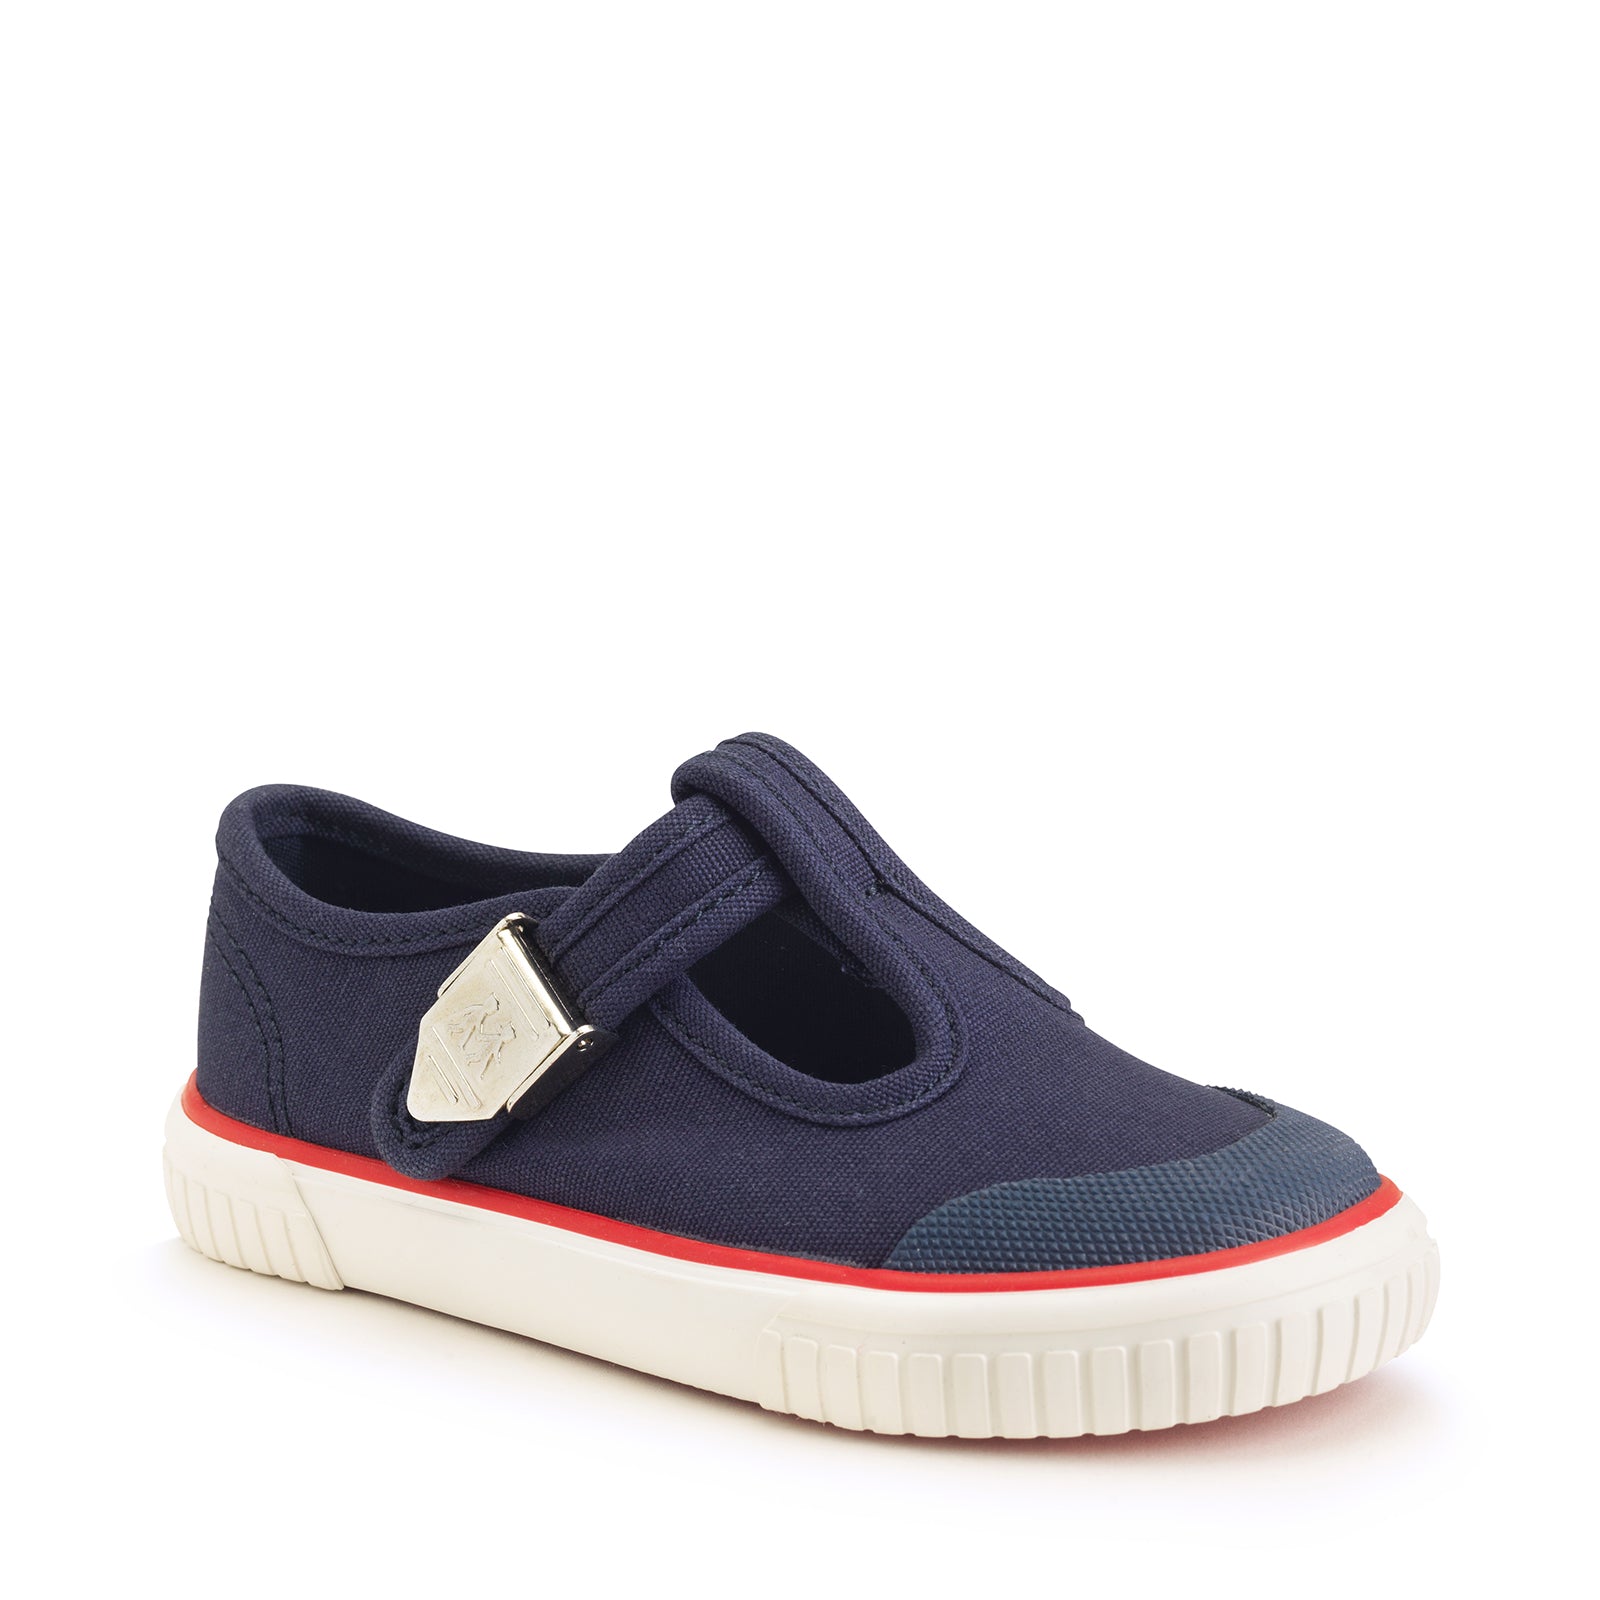 A unisex canvas T-Bar shoe by Start-Rite, style Anchor, in navy, with white sole and red trim and silver buckle fastening. Angled view.